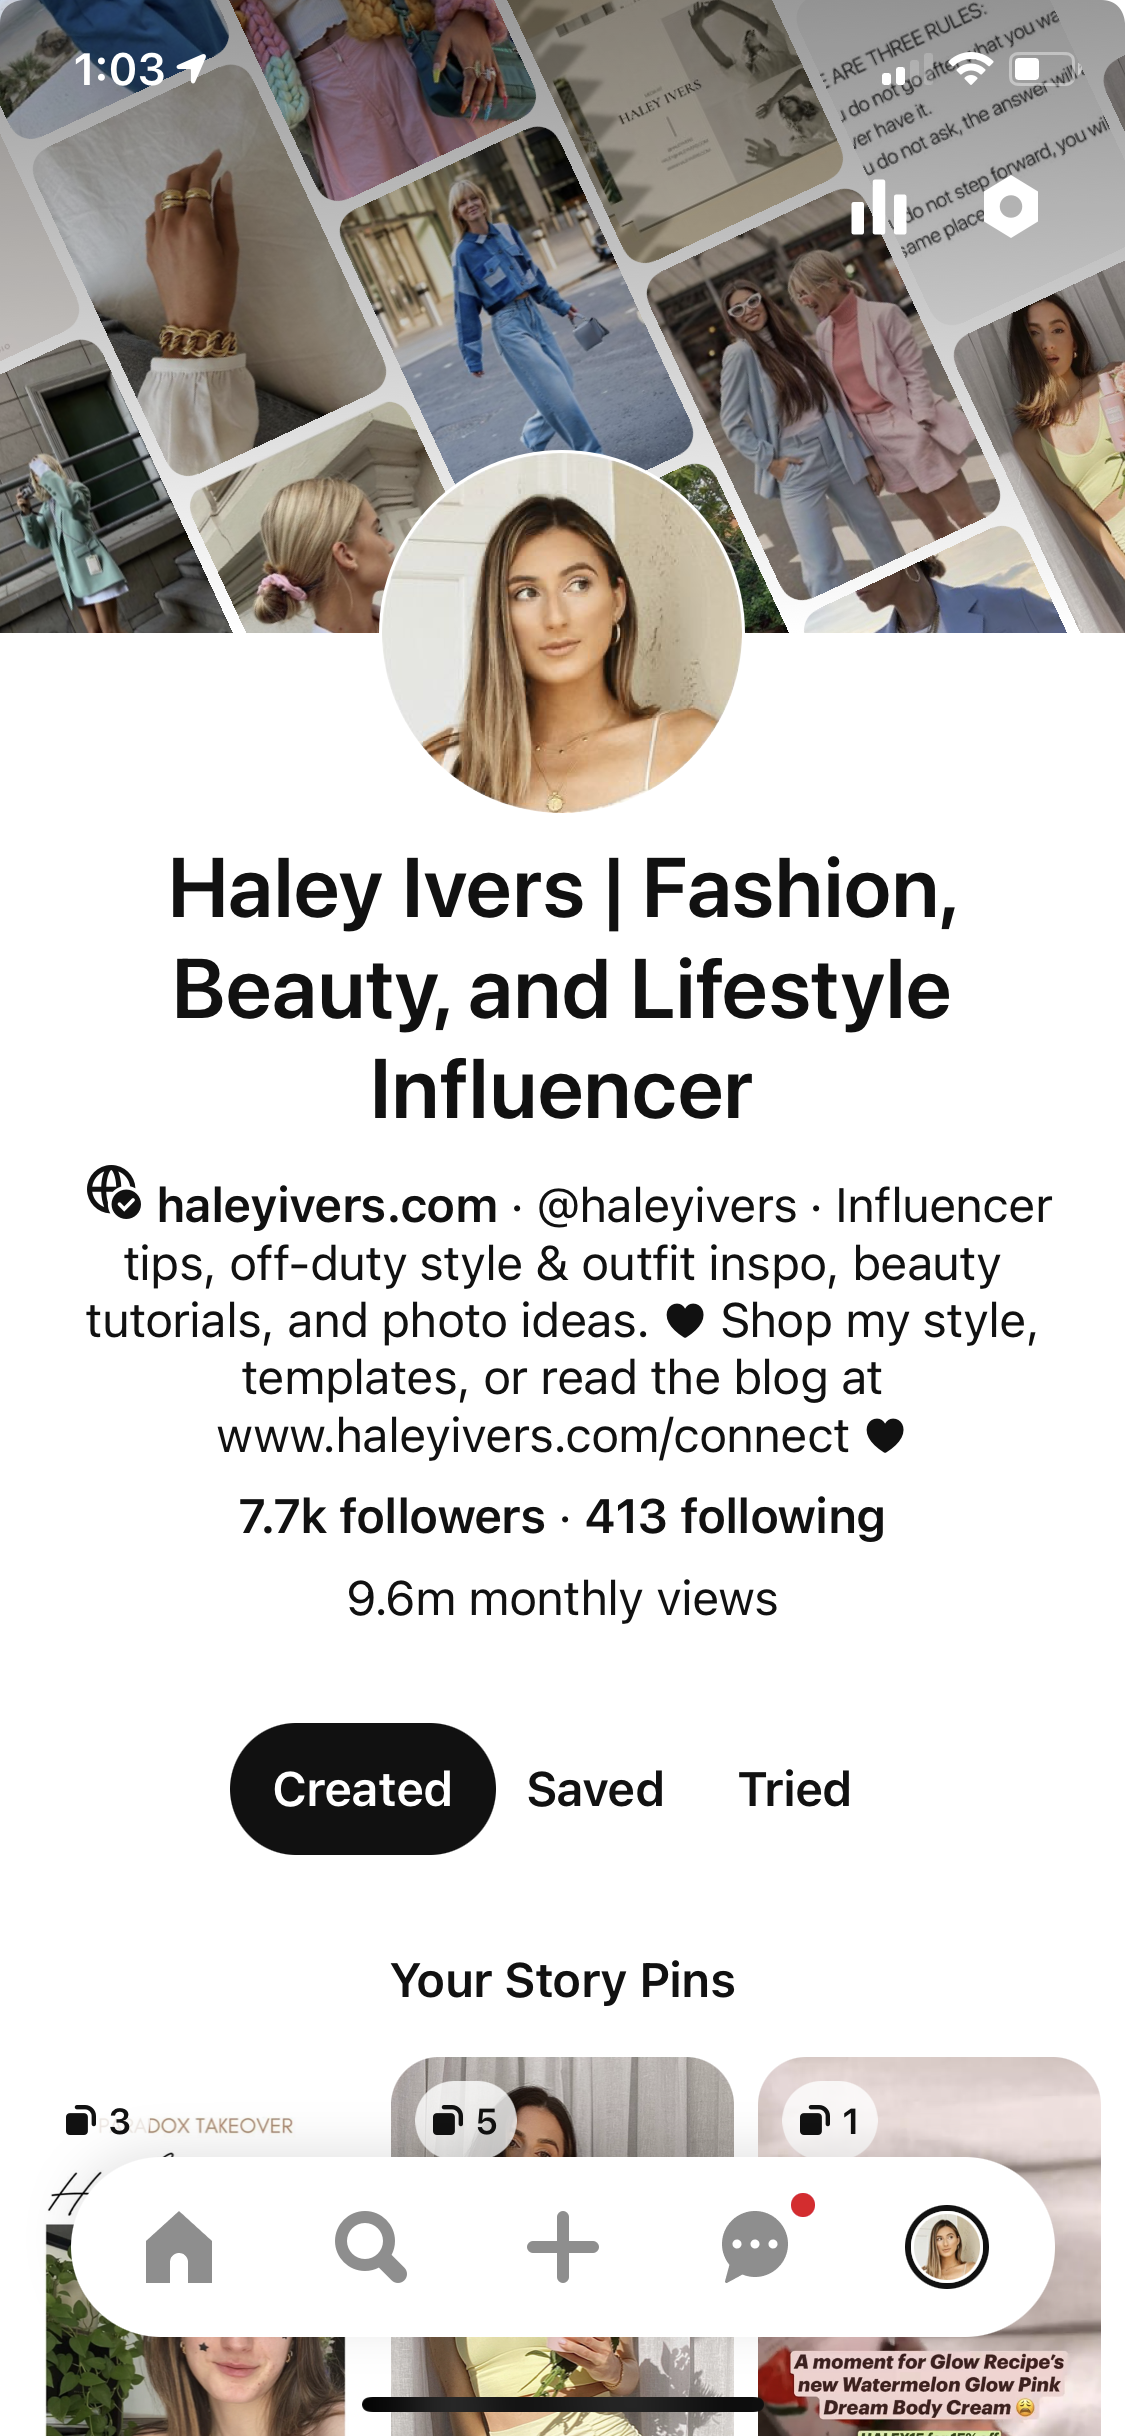 How to Leverage Pinterest as an Influencer